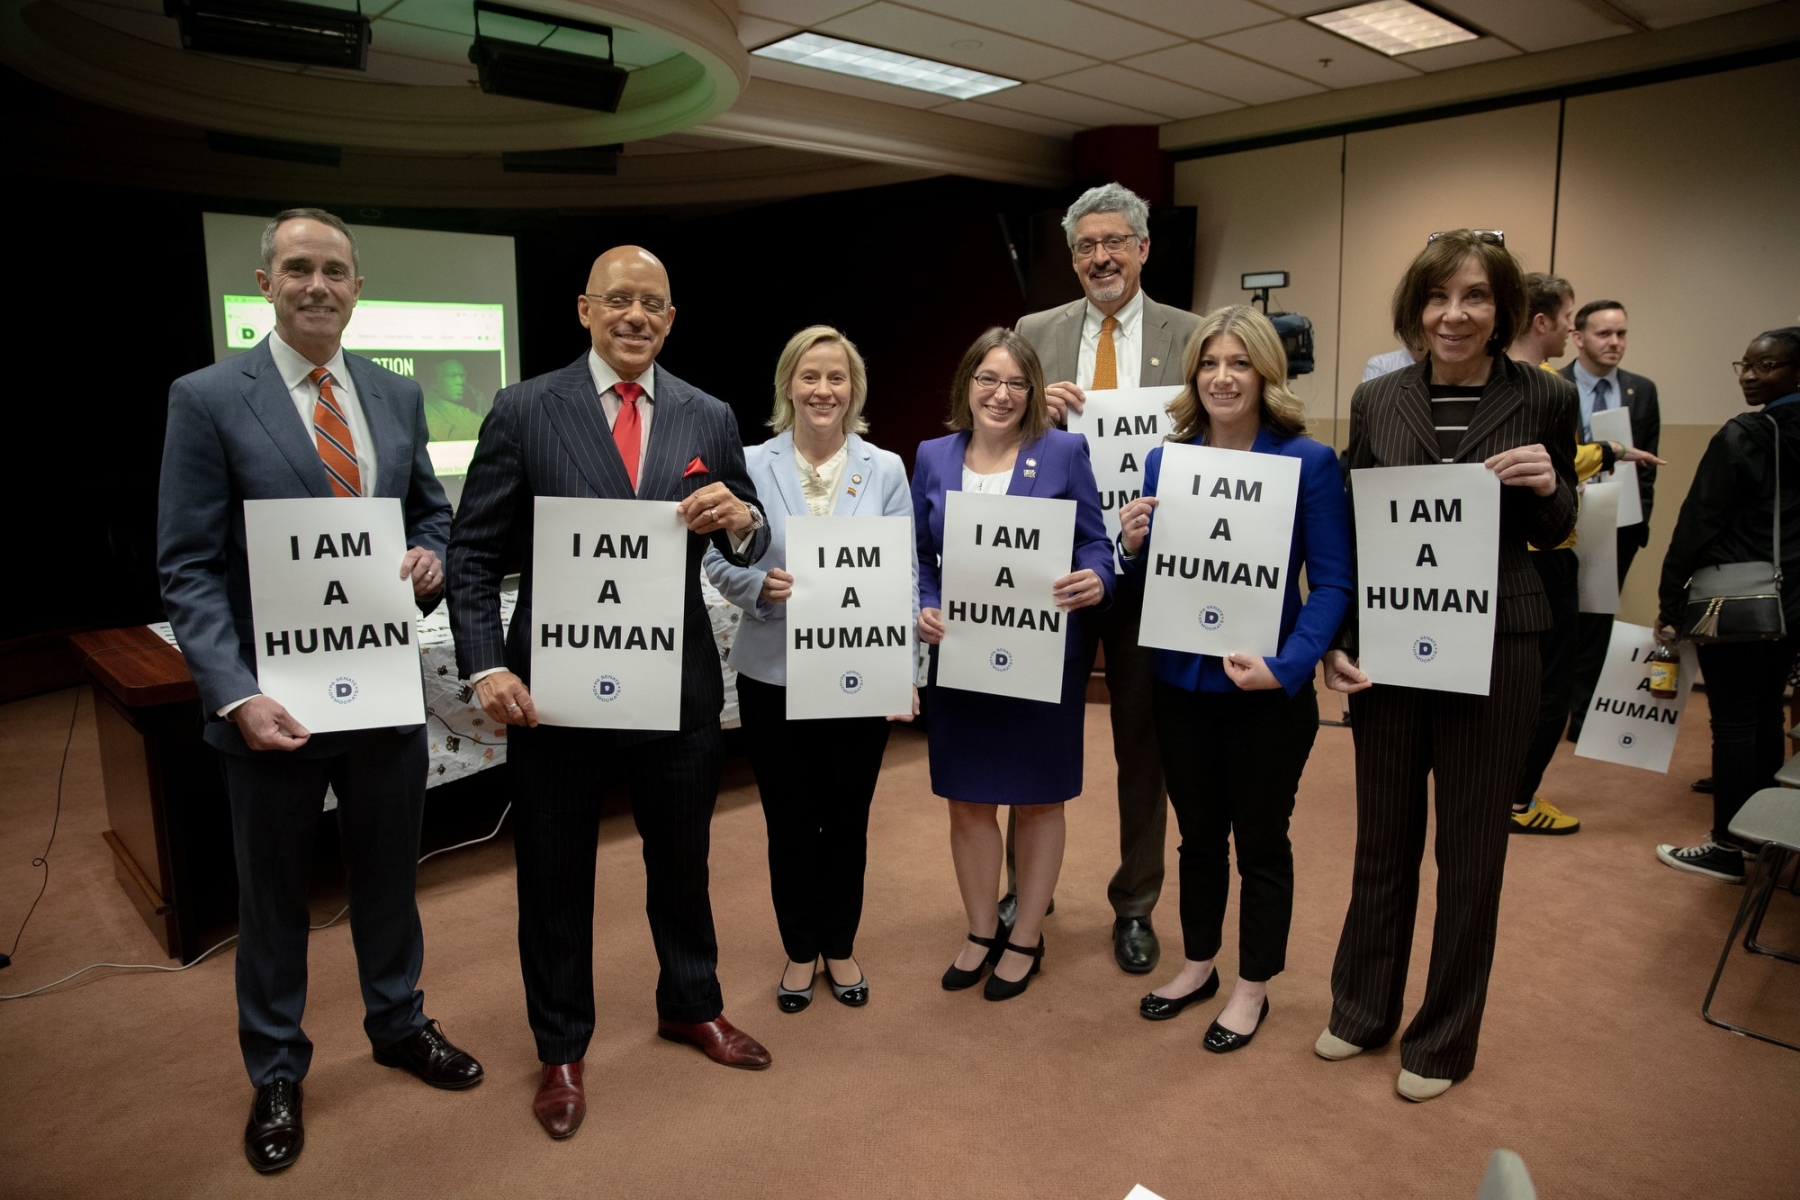 April 30, 2019: The Pennsylvania Senate Democrats hosted a screening of the 1971 documentary “Keep Your Trash,” followed by a discussion on economic justice to close out the 30-day statewide Call to Action on the Crisis of Poverty and Economic Insecurity at the capitol. 